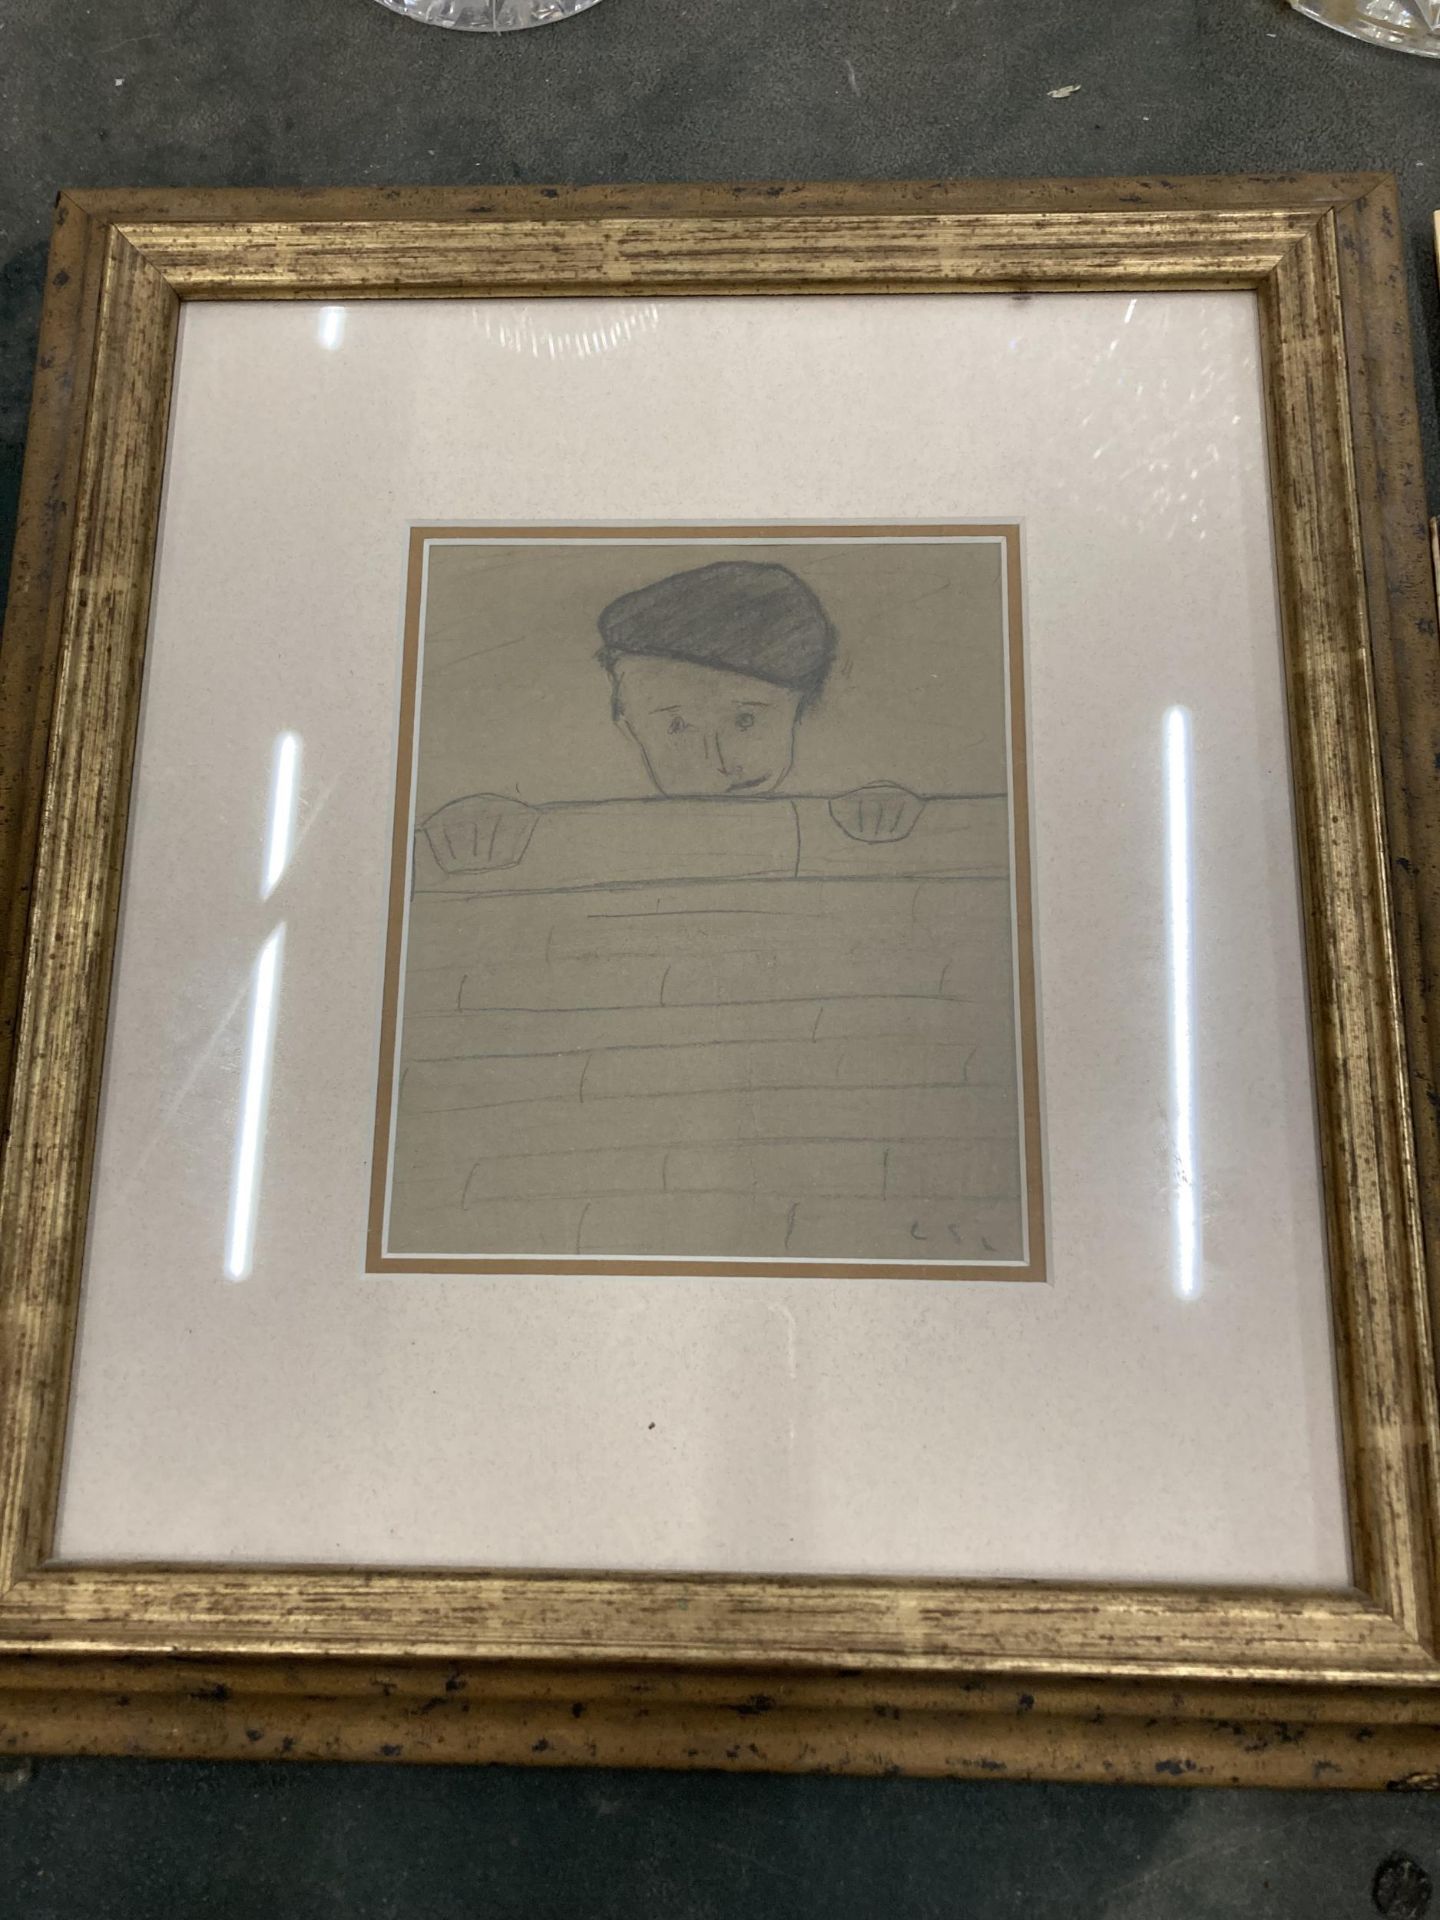 A LOWRY STYLE SKETCH, FRAMED PLUS THREE LOWRY BOOKS - Image 5 of 5